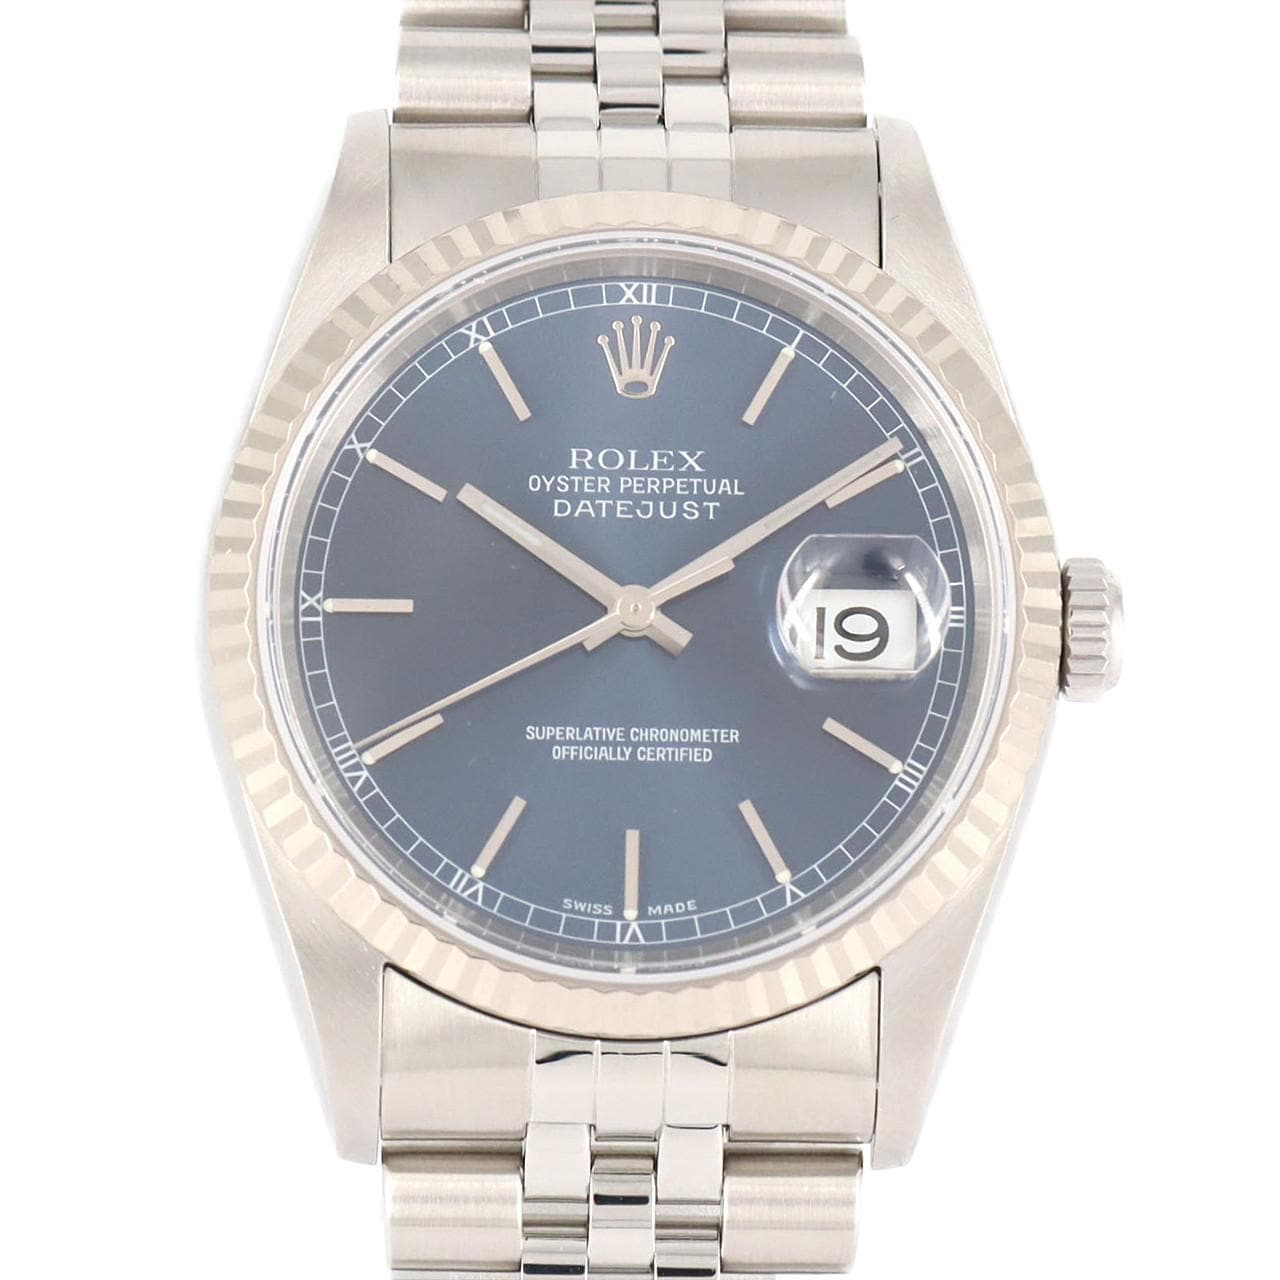 ROLEX Datejust 16234 SSxWG Automatic P number